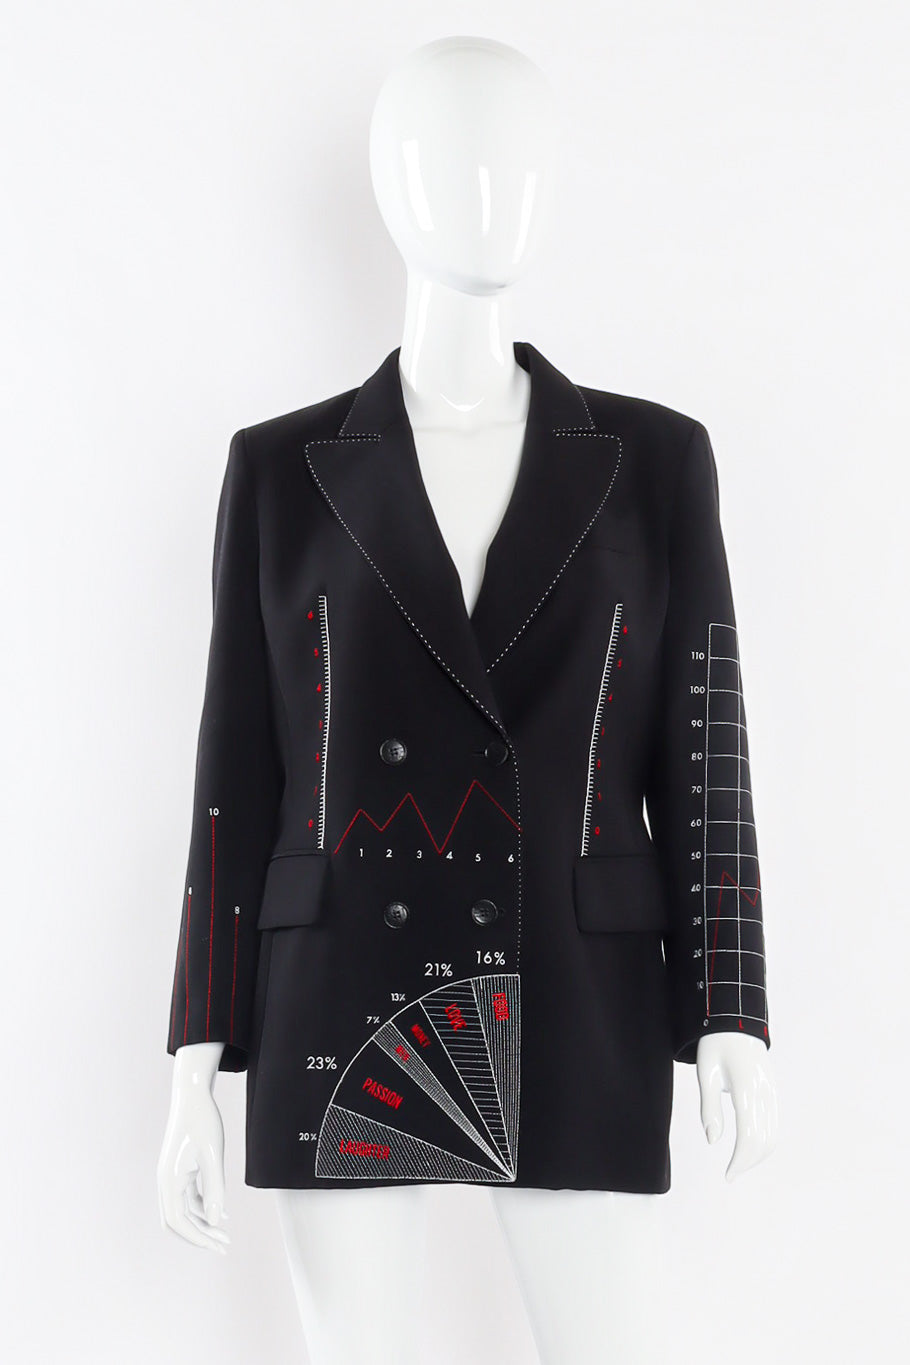 Embroidered graph blazer by Moschino front view photo @recessla